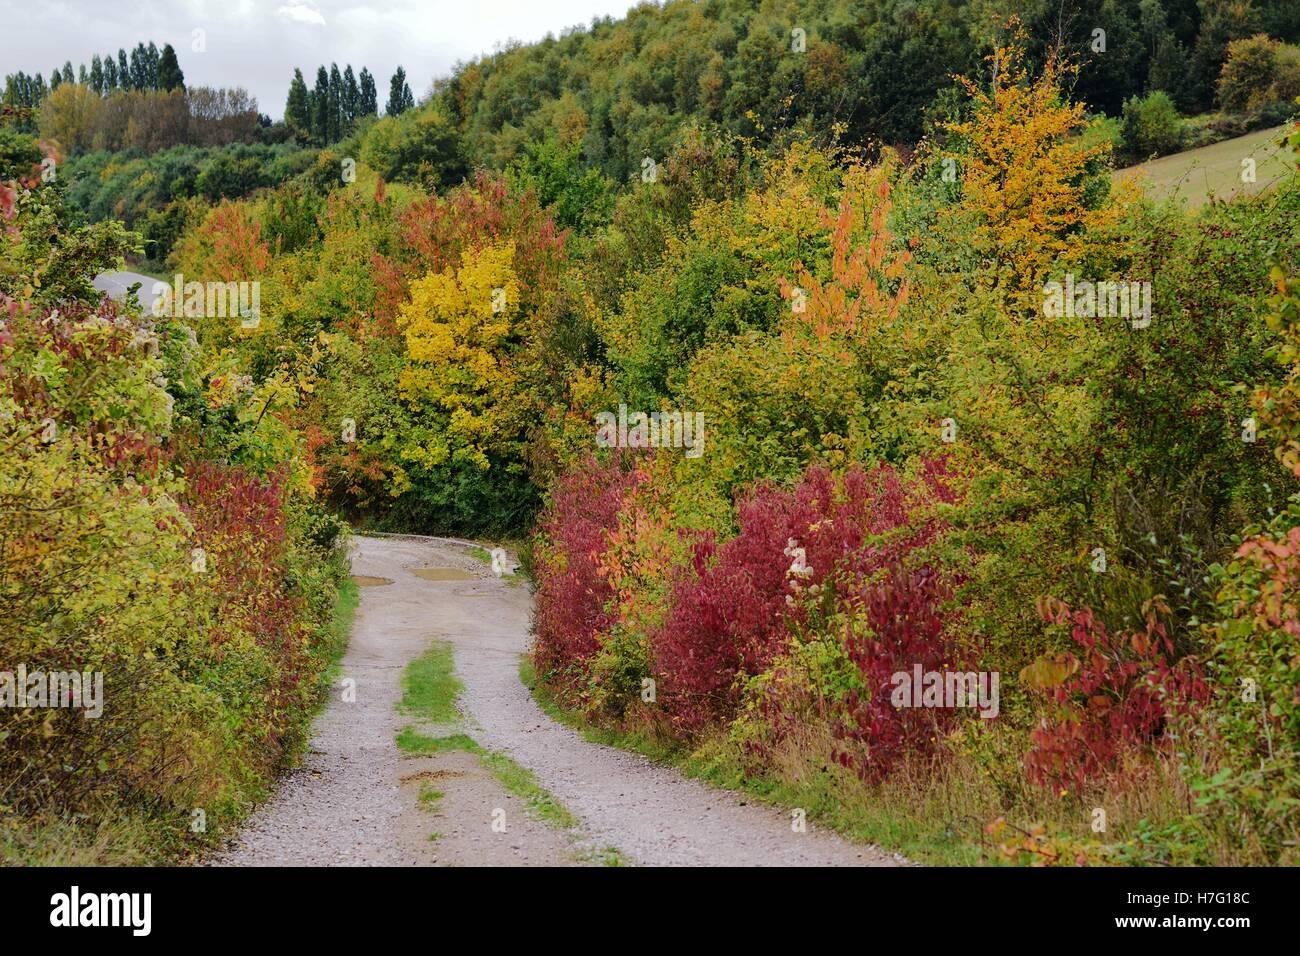 Path lined with shrubs and trees in autumn Stock Photo